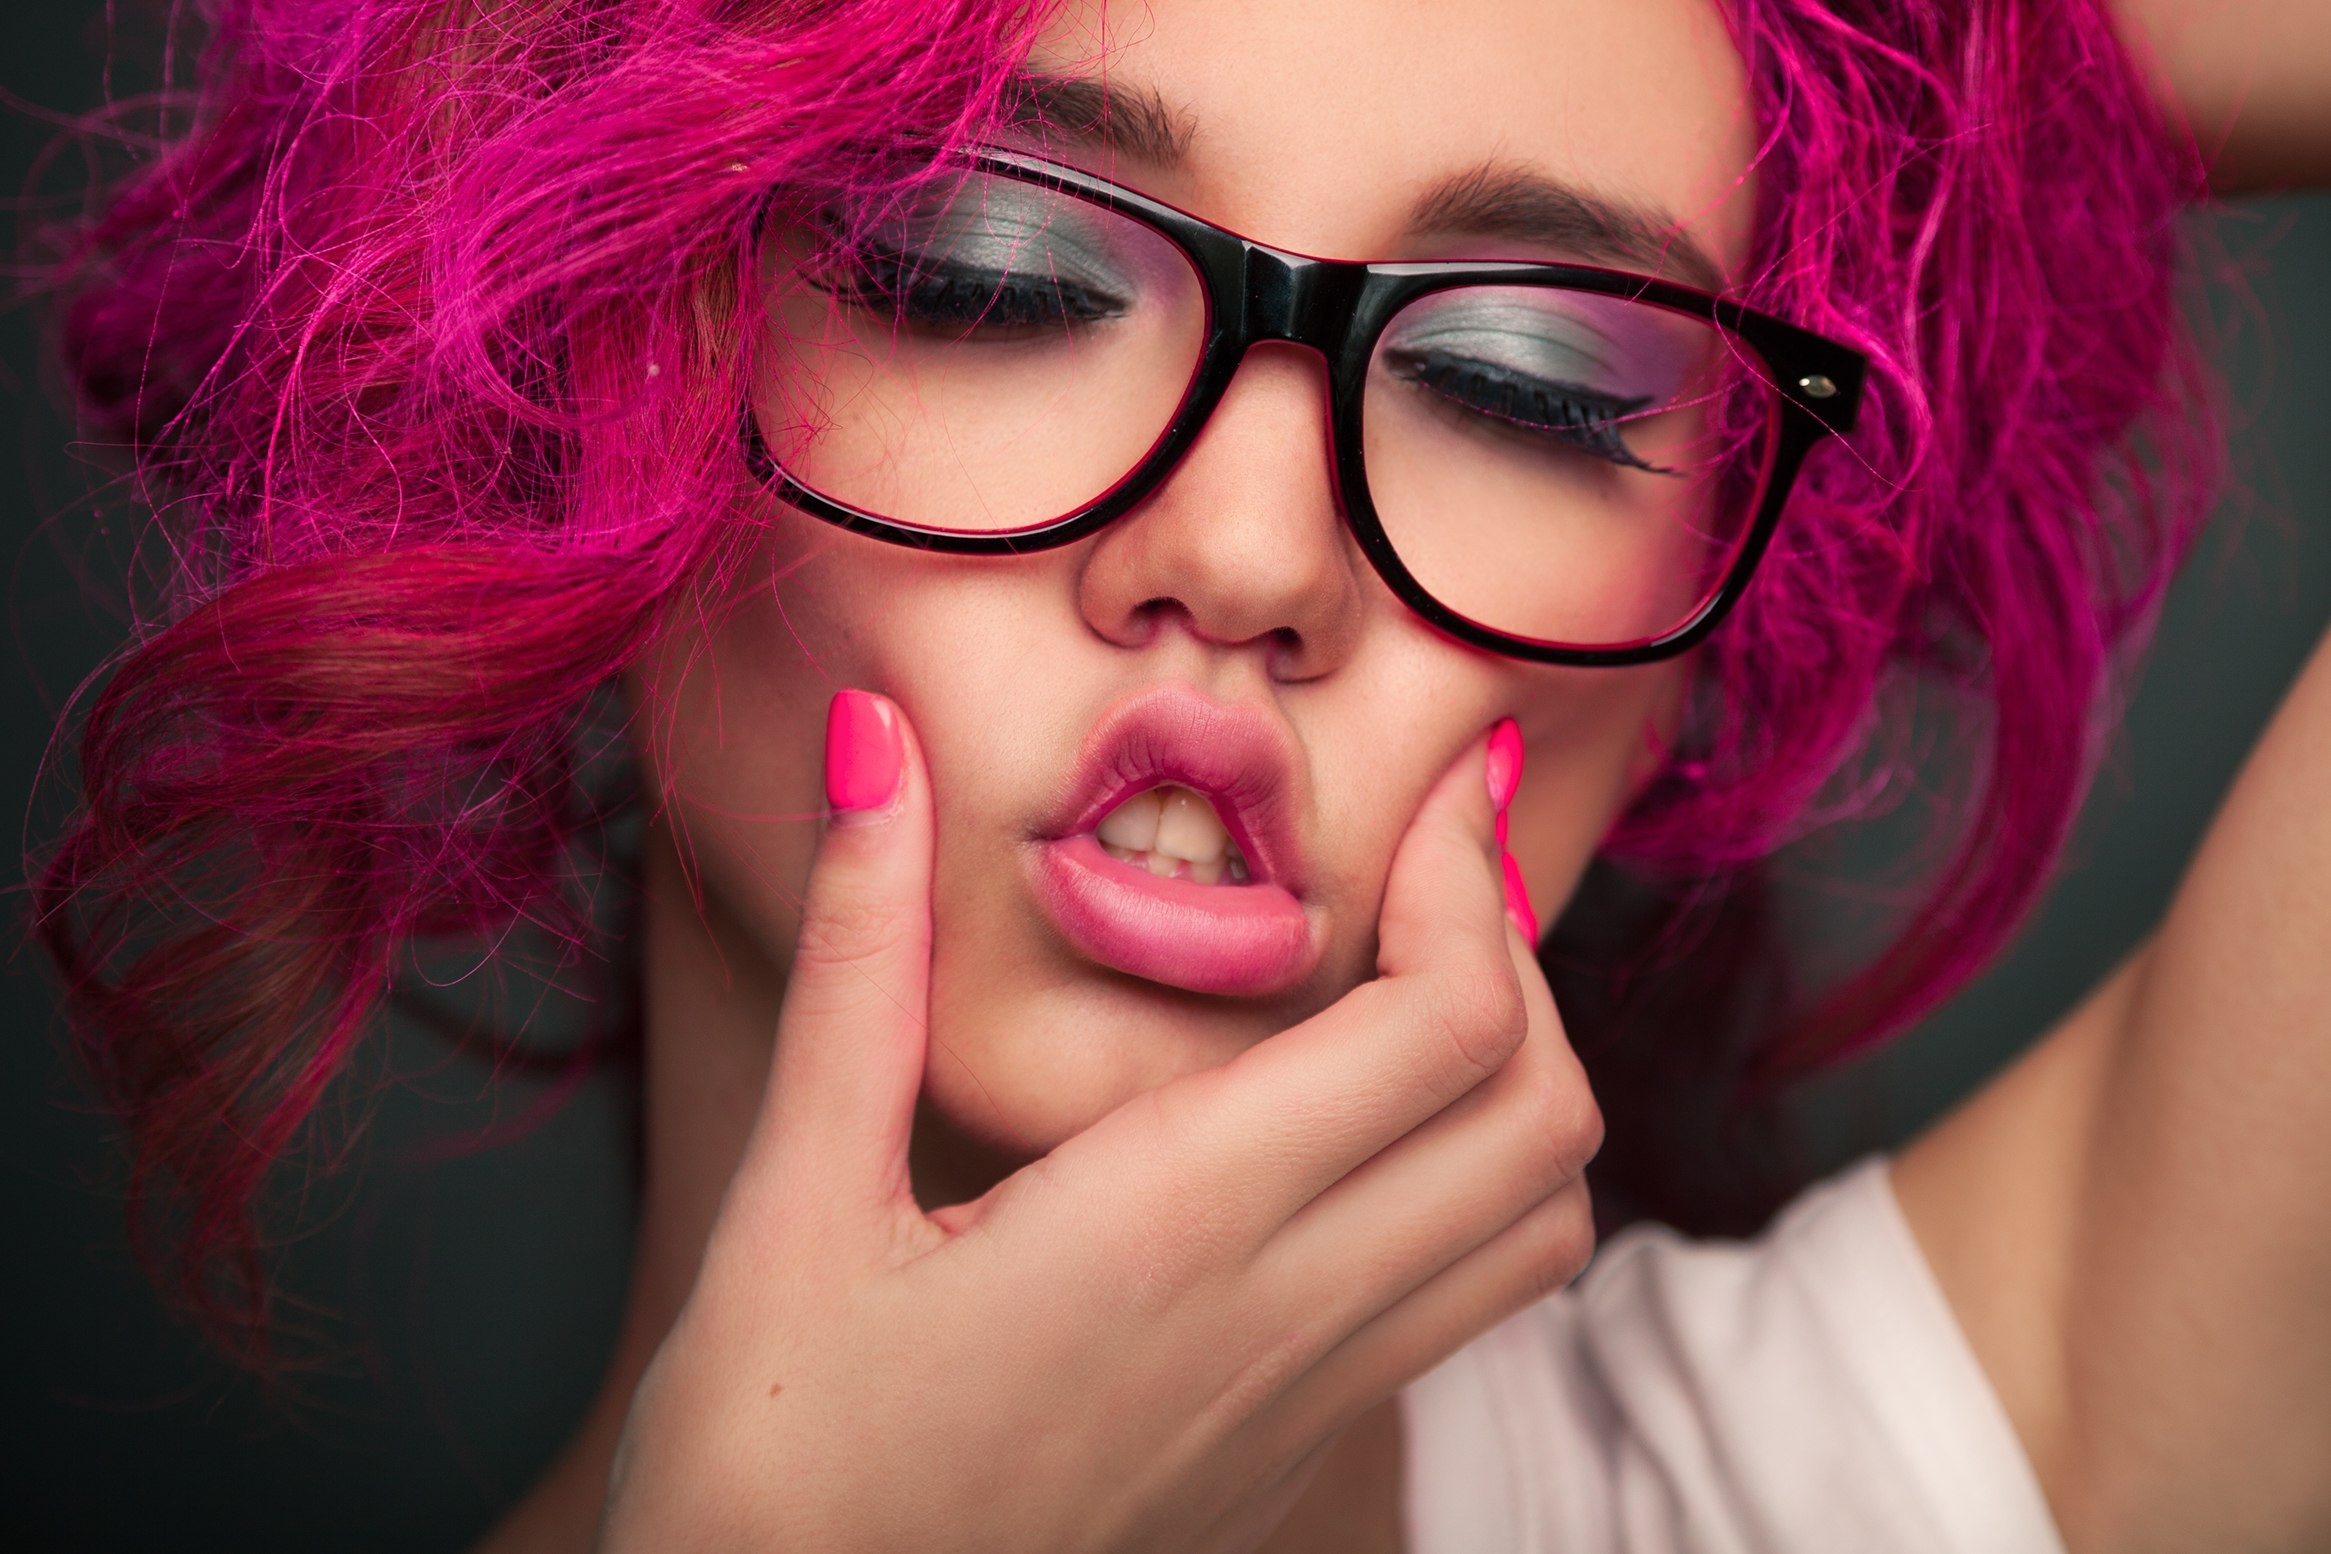 People 2331x1554 Elizabeth Broflovski women model face portrait women with glasses glasses dyed hair painted nails closed eyes makeup women indoors indoors studio closeup young women open mouth